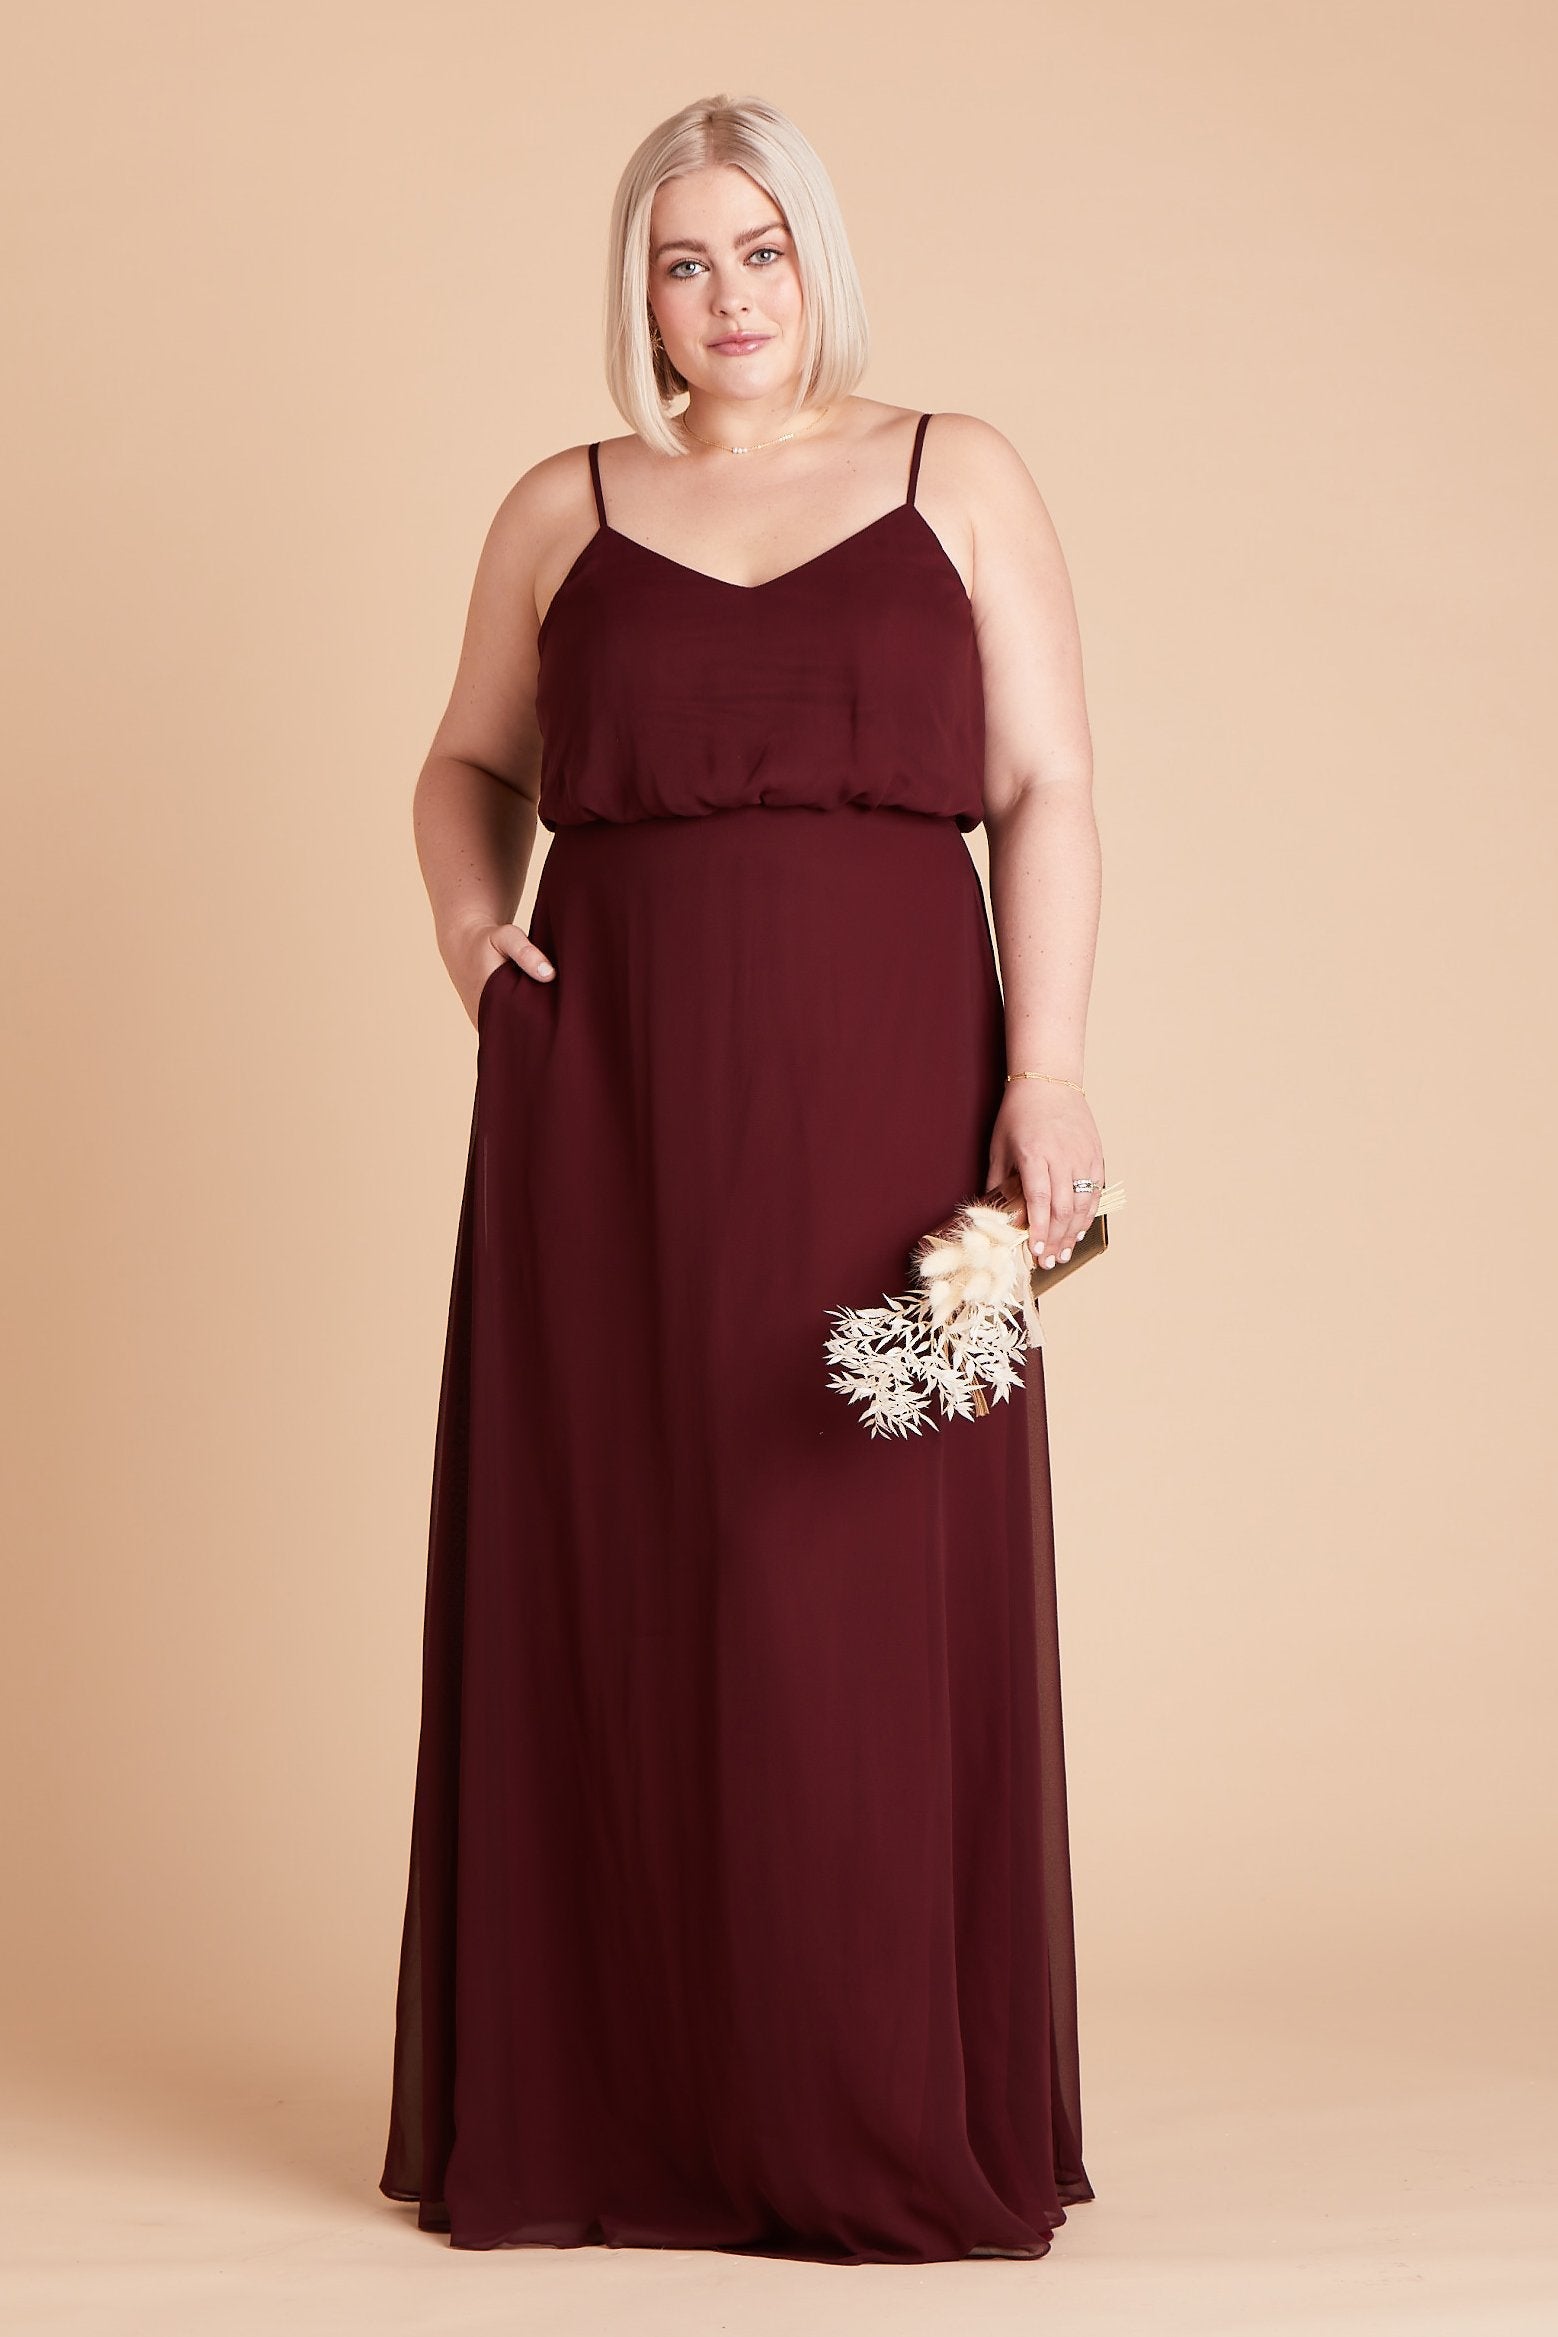 Gwennie plus size bridesmaid dress in cabernet burgundy chiffon by Birdy Grey, front view with hand in pocket